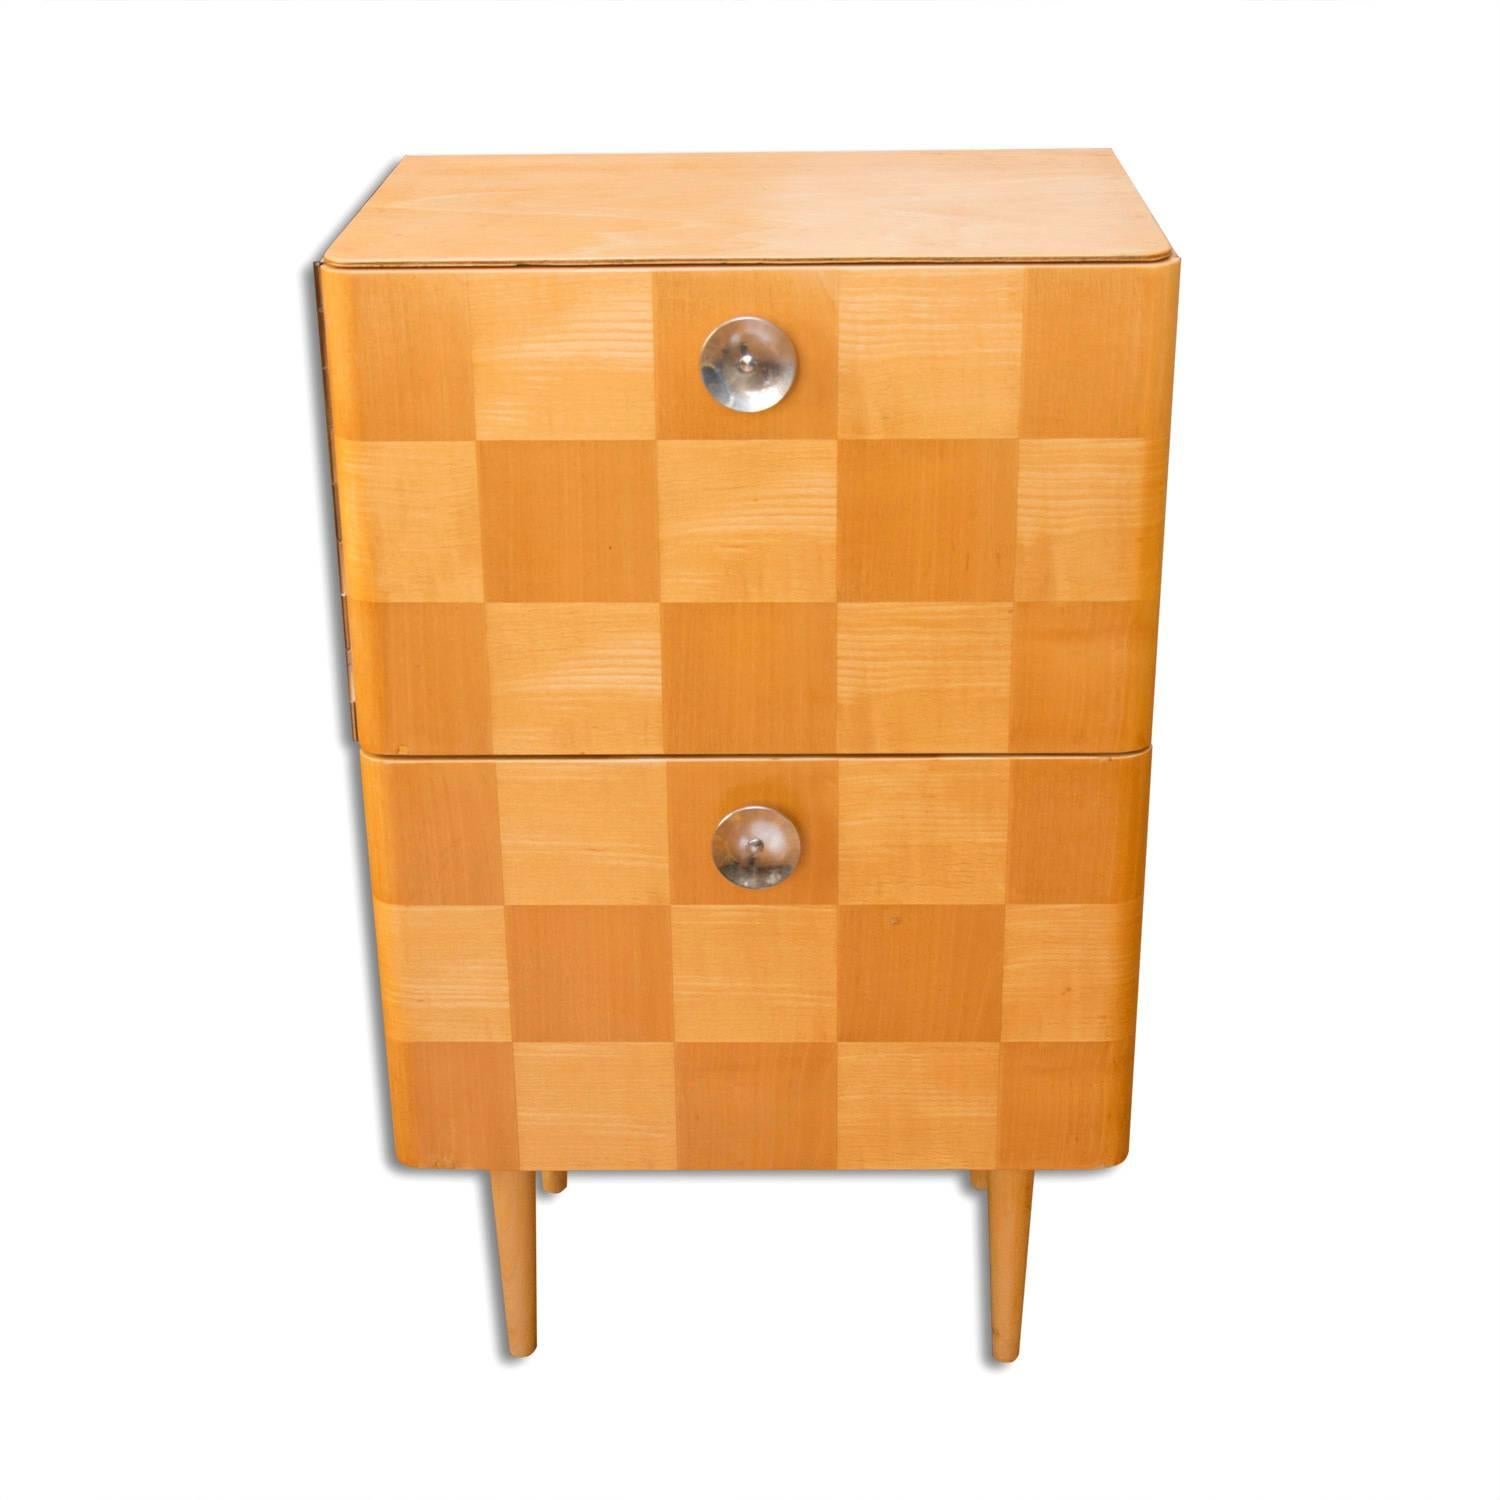 This commode or bedside table with a checkerboard pattern was made in former Czechoslovakia in the 1950s. Attribute to Jindrich Halabala. It was made of beechwood, plywood and features a chromed handles. It stands on four beech legs. The commode is